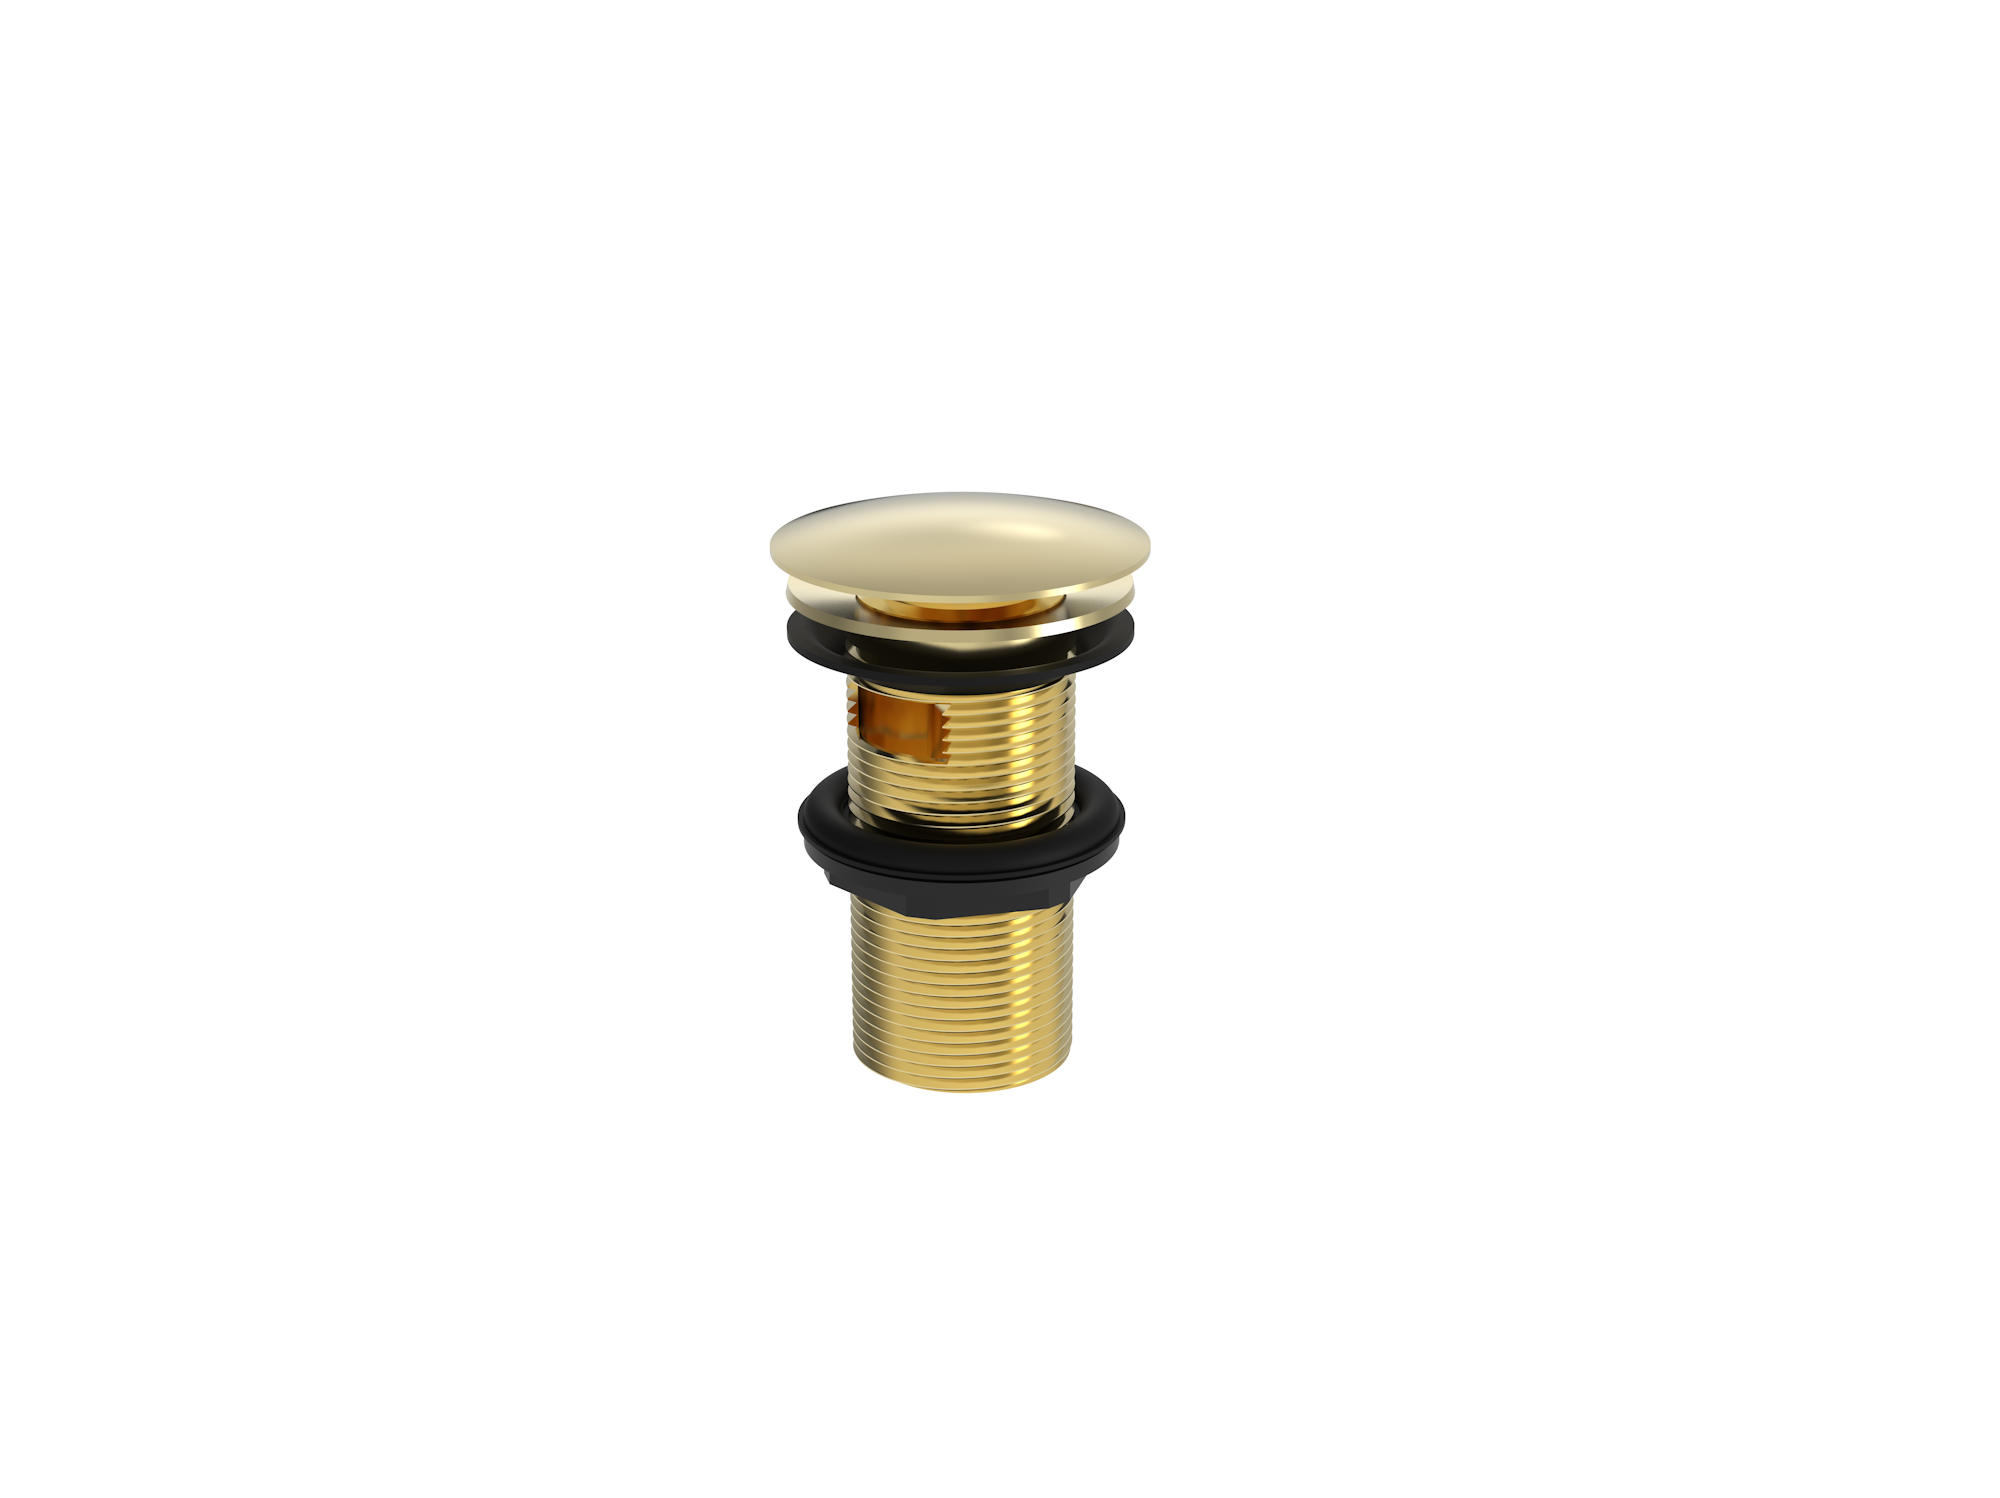 1 1/4" round clicker slotted waste - Brushed Brass